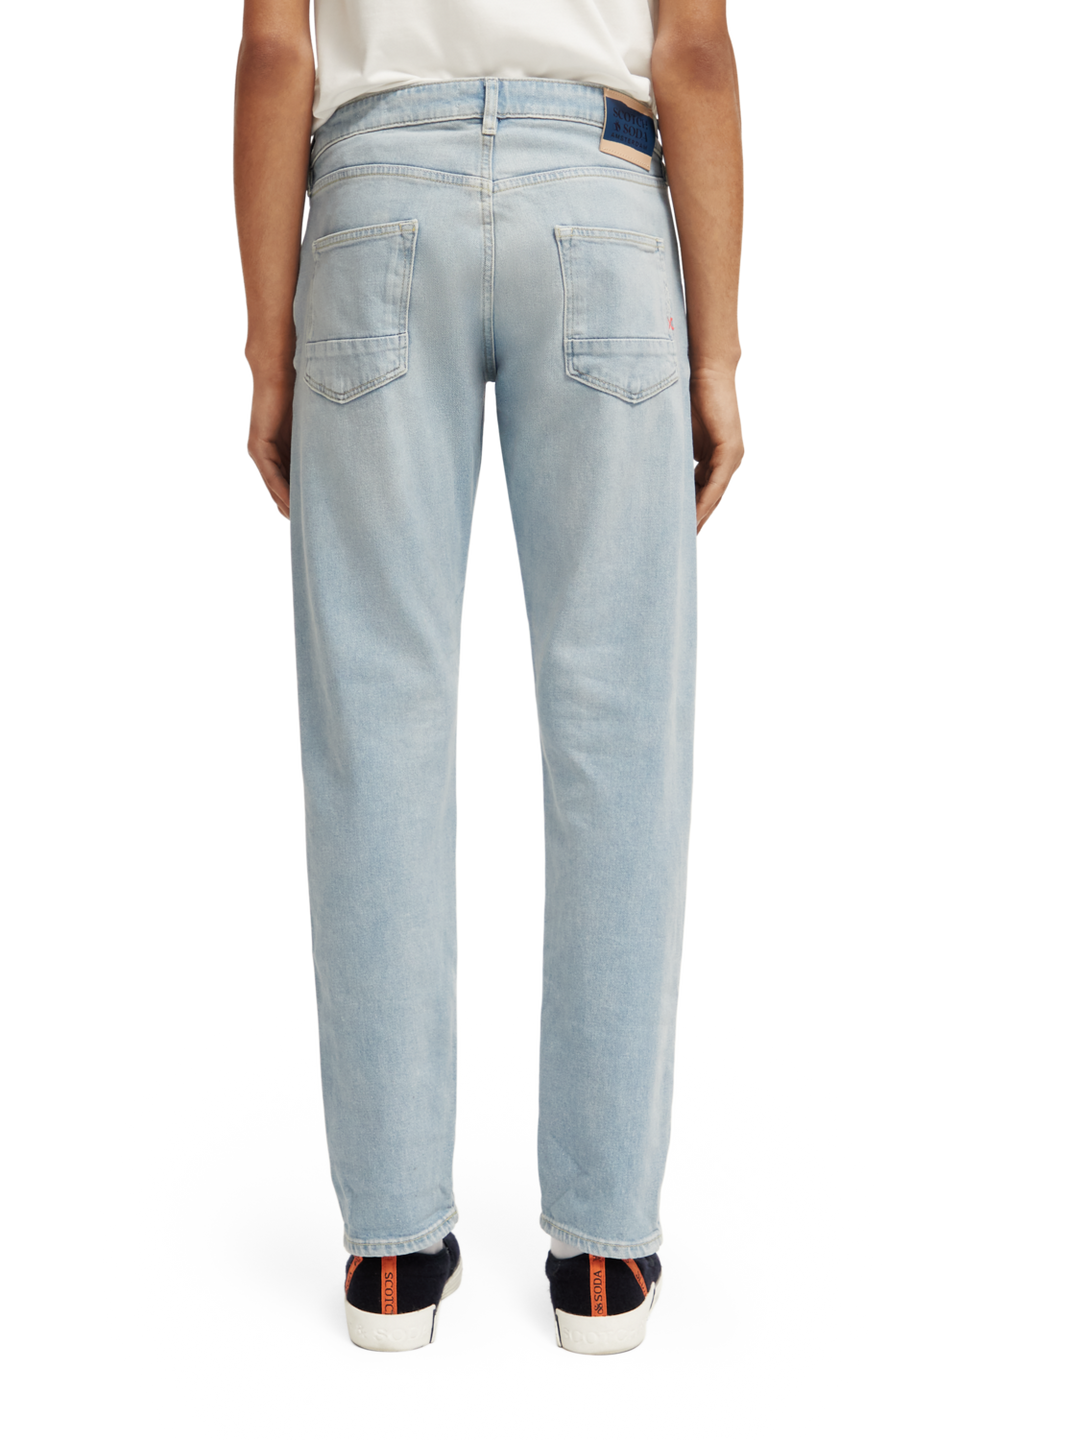 Ralston Blue Skies Regular Slim Fit Jeans | Buster McGee Daylesford